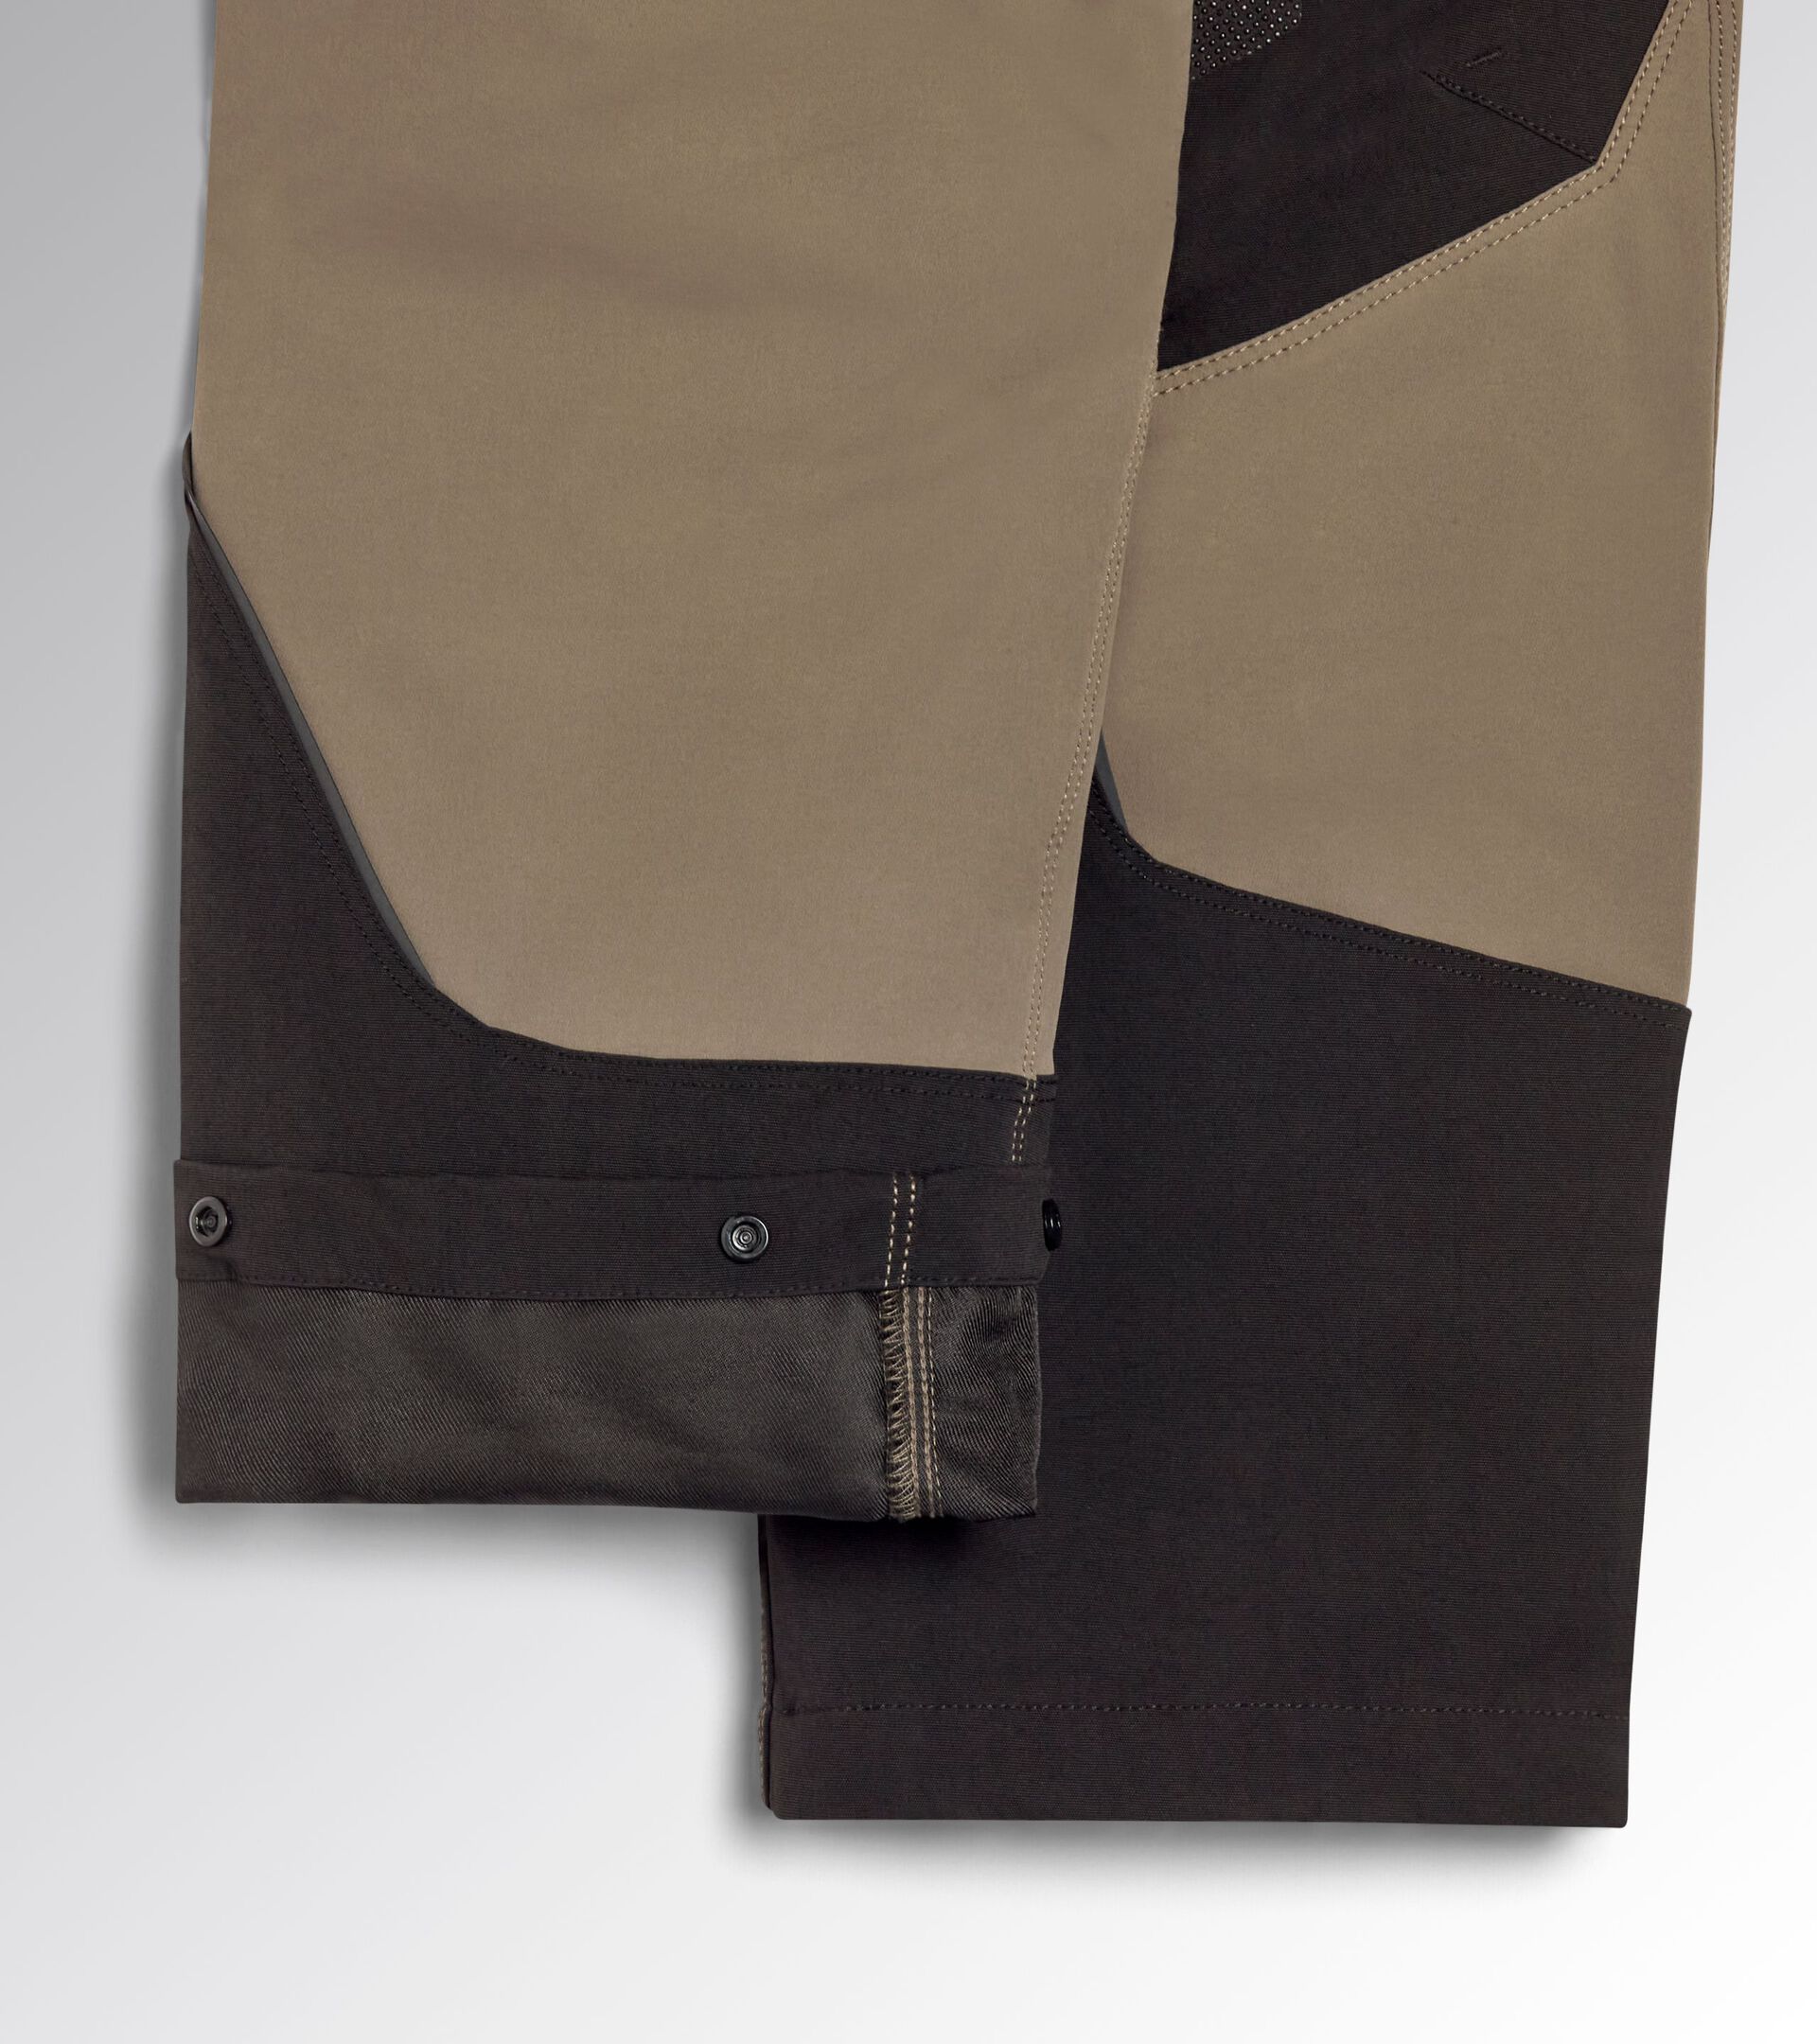 Work trousers PANT PERFORMANCE EVOLUTION BUNG GRAY - Utility